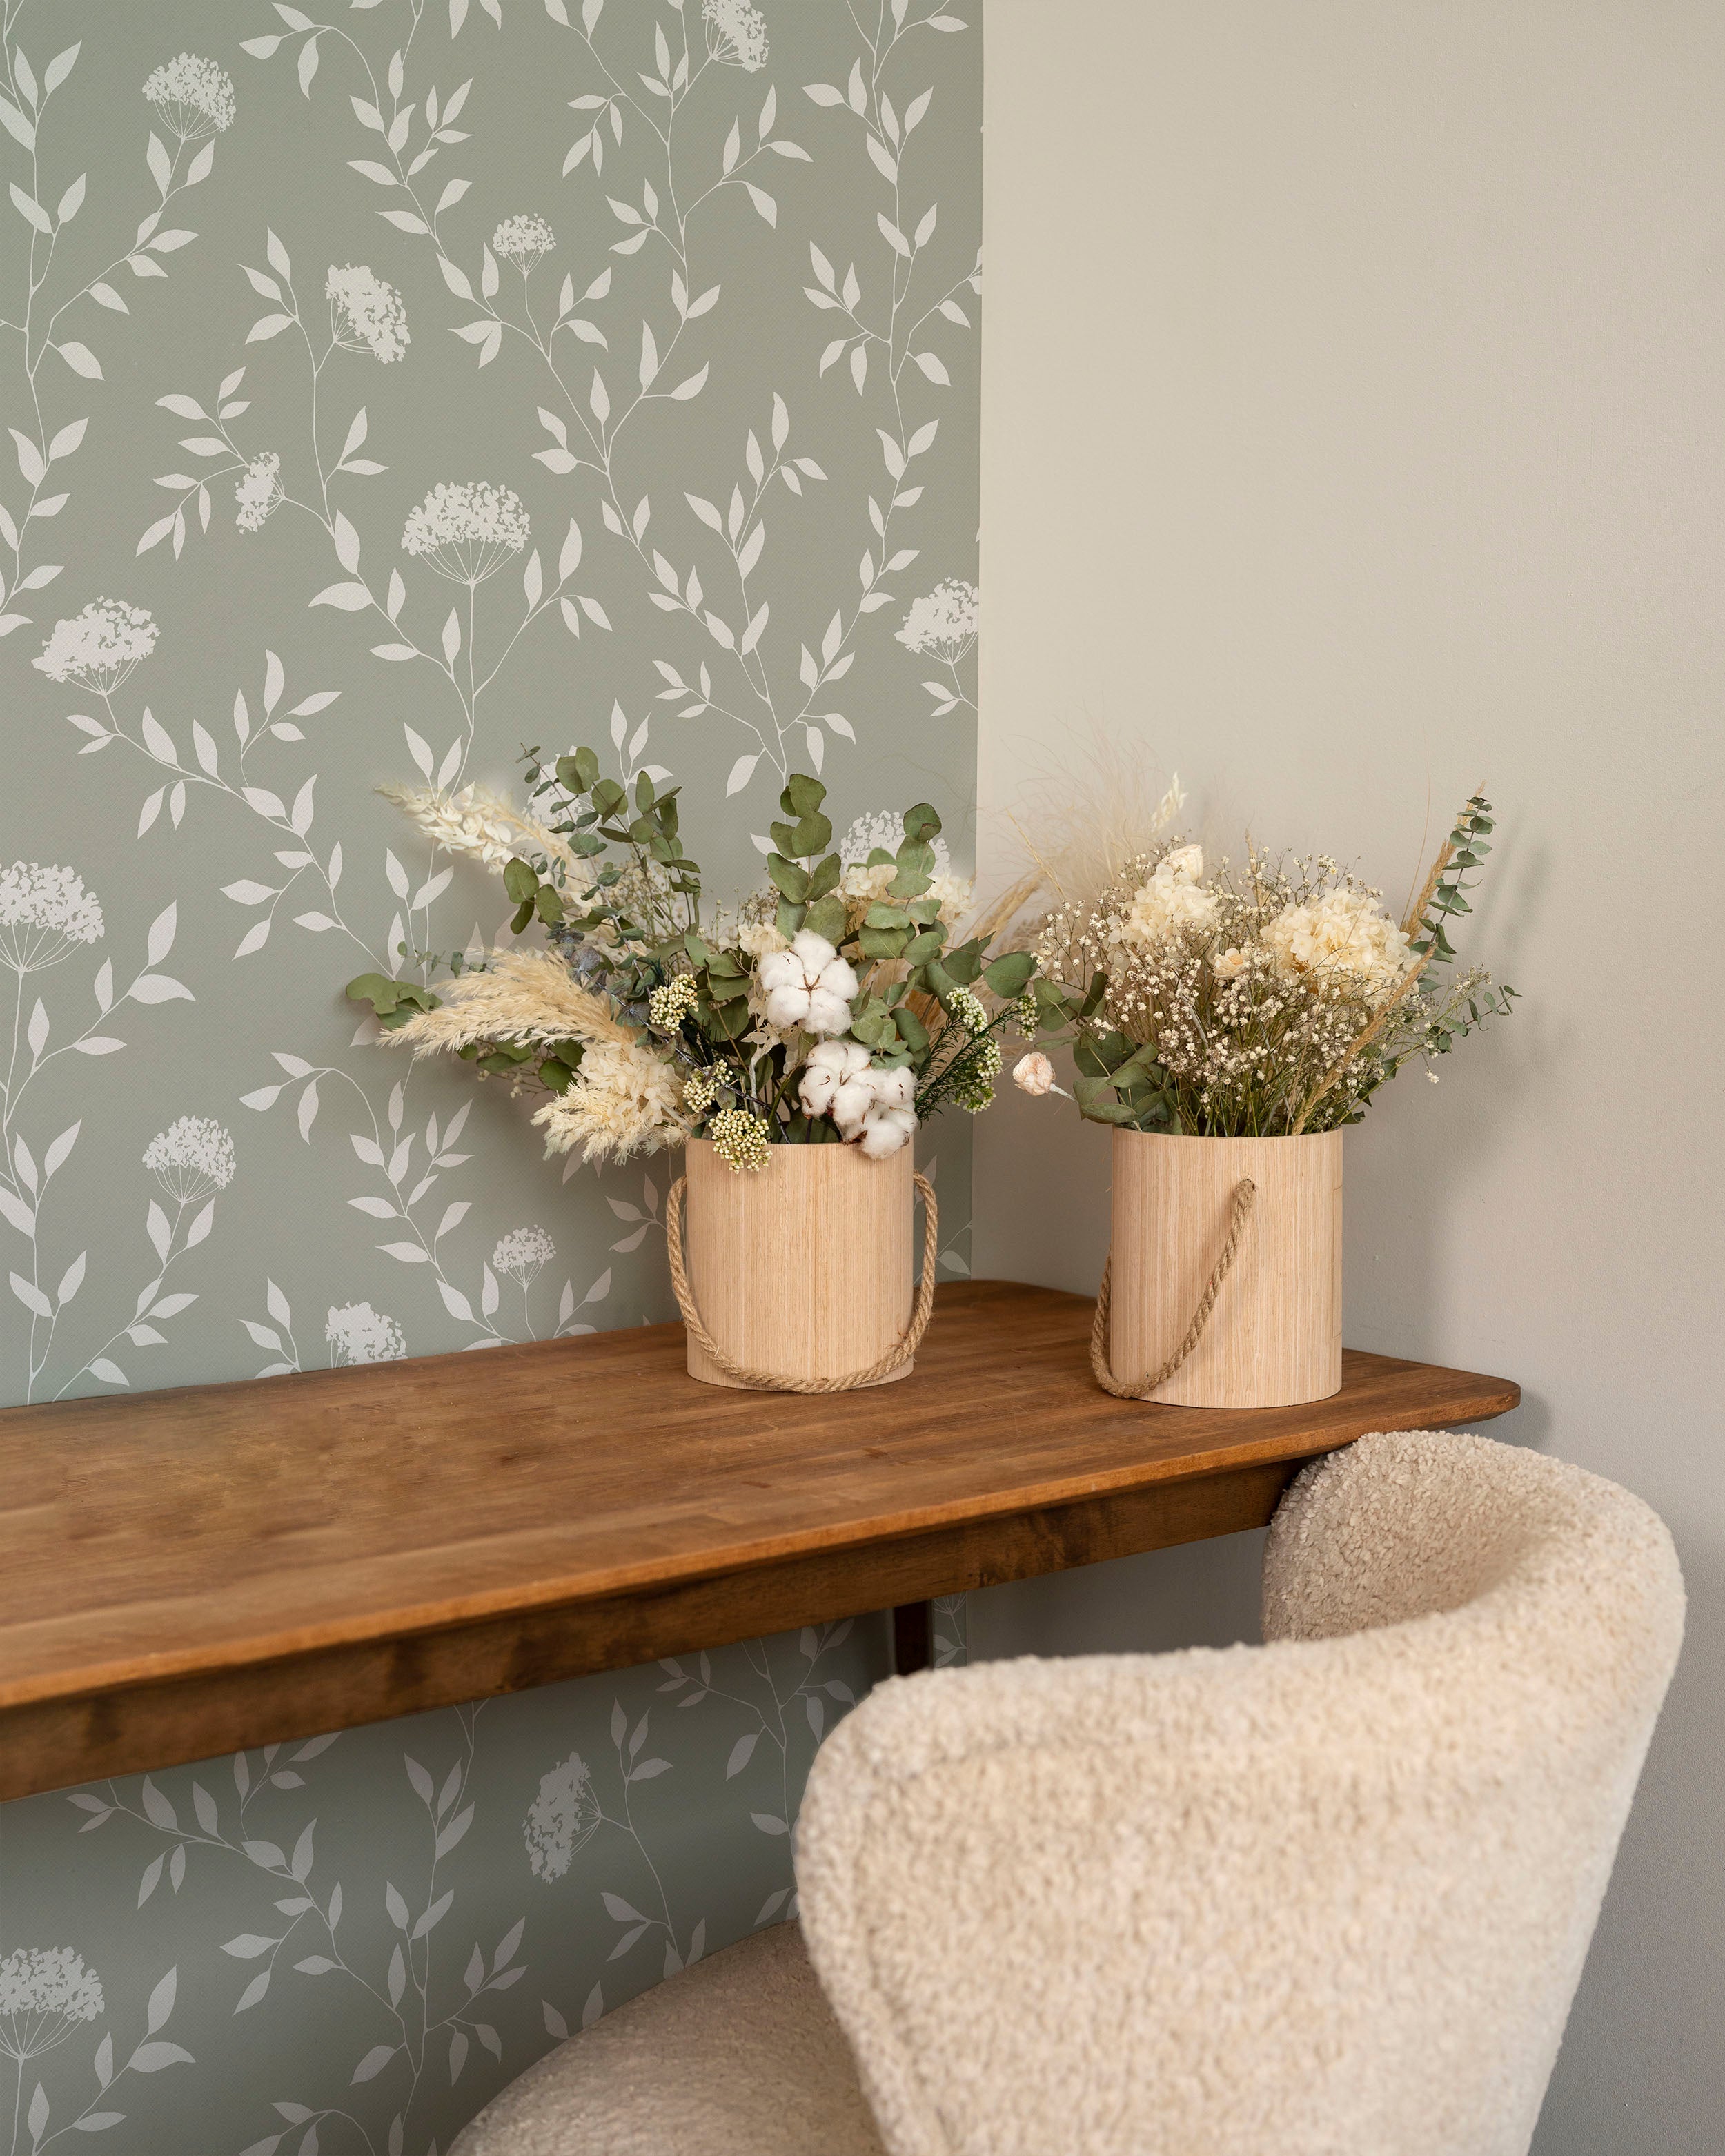  An interior setting demonstrating the application of the Botanical Elegance Wallpaper-Olive. The wallpaper provides a subtle yet charming backdrop for a wooden console table holding two cylindrical wooden vases with dried floral arrangements. The textures and colors of the foliage in the vases complement the wallpaper's botanical theme. To the right, the wall transitions to a solid olive shade, showing the wallpaper's potential for creating a cohesive color scheme in home decor.